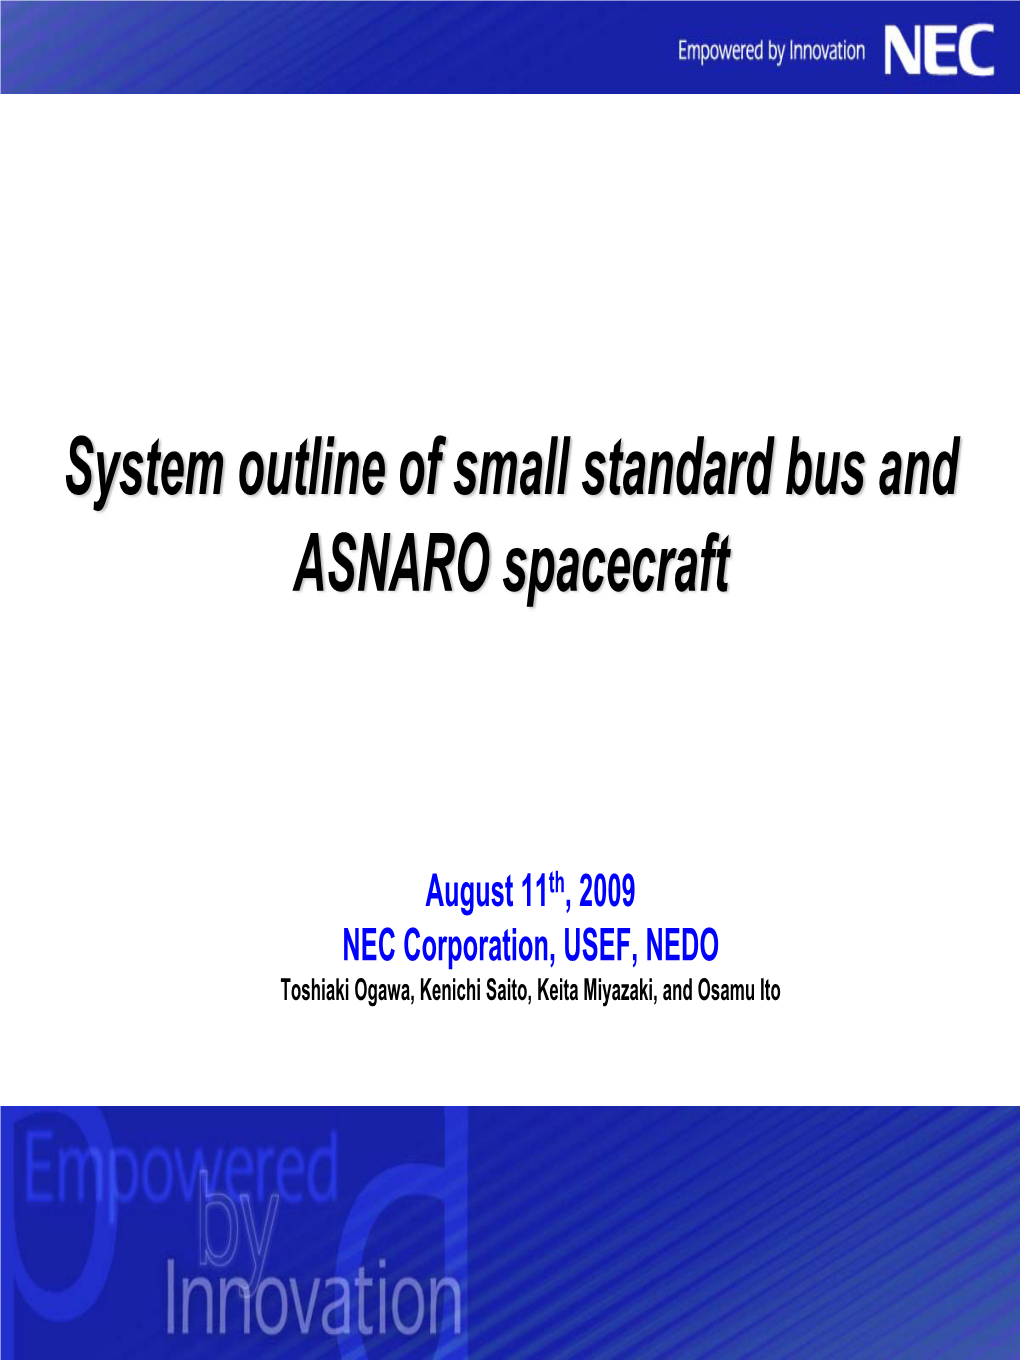 System Outline of Small Standard Bus and ASNARO Spacecraft